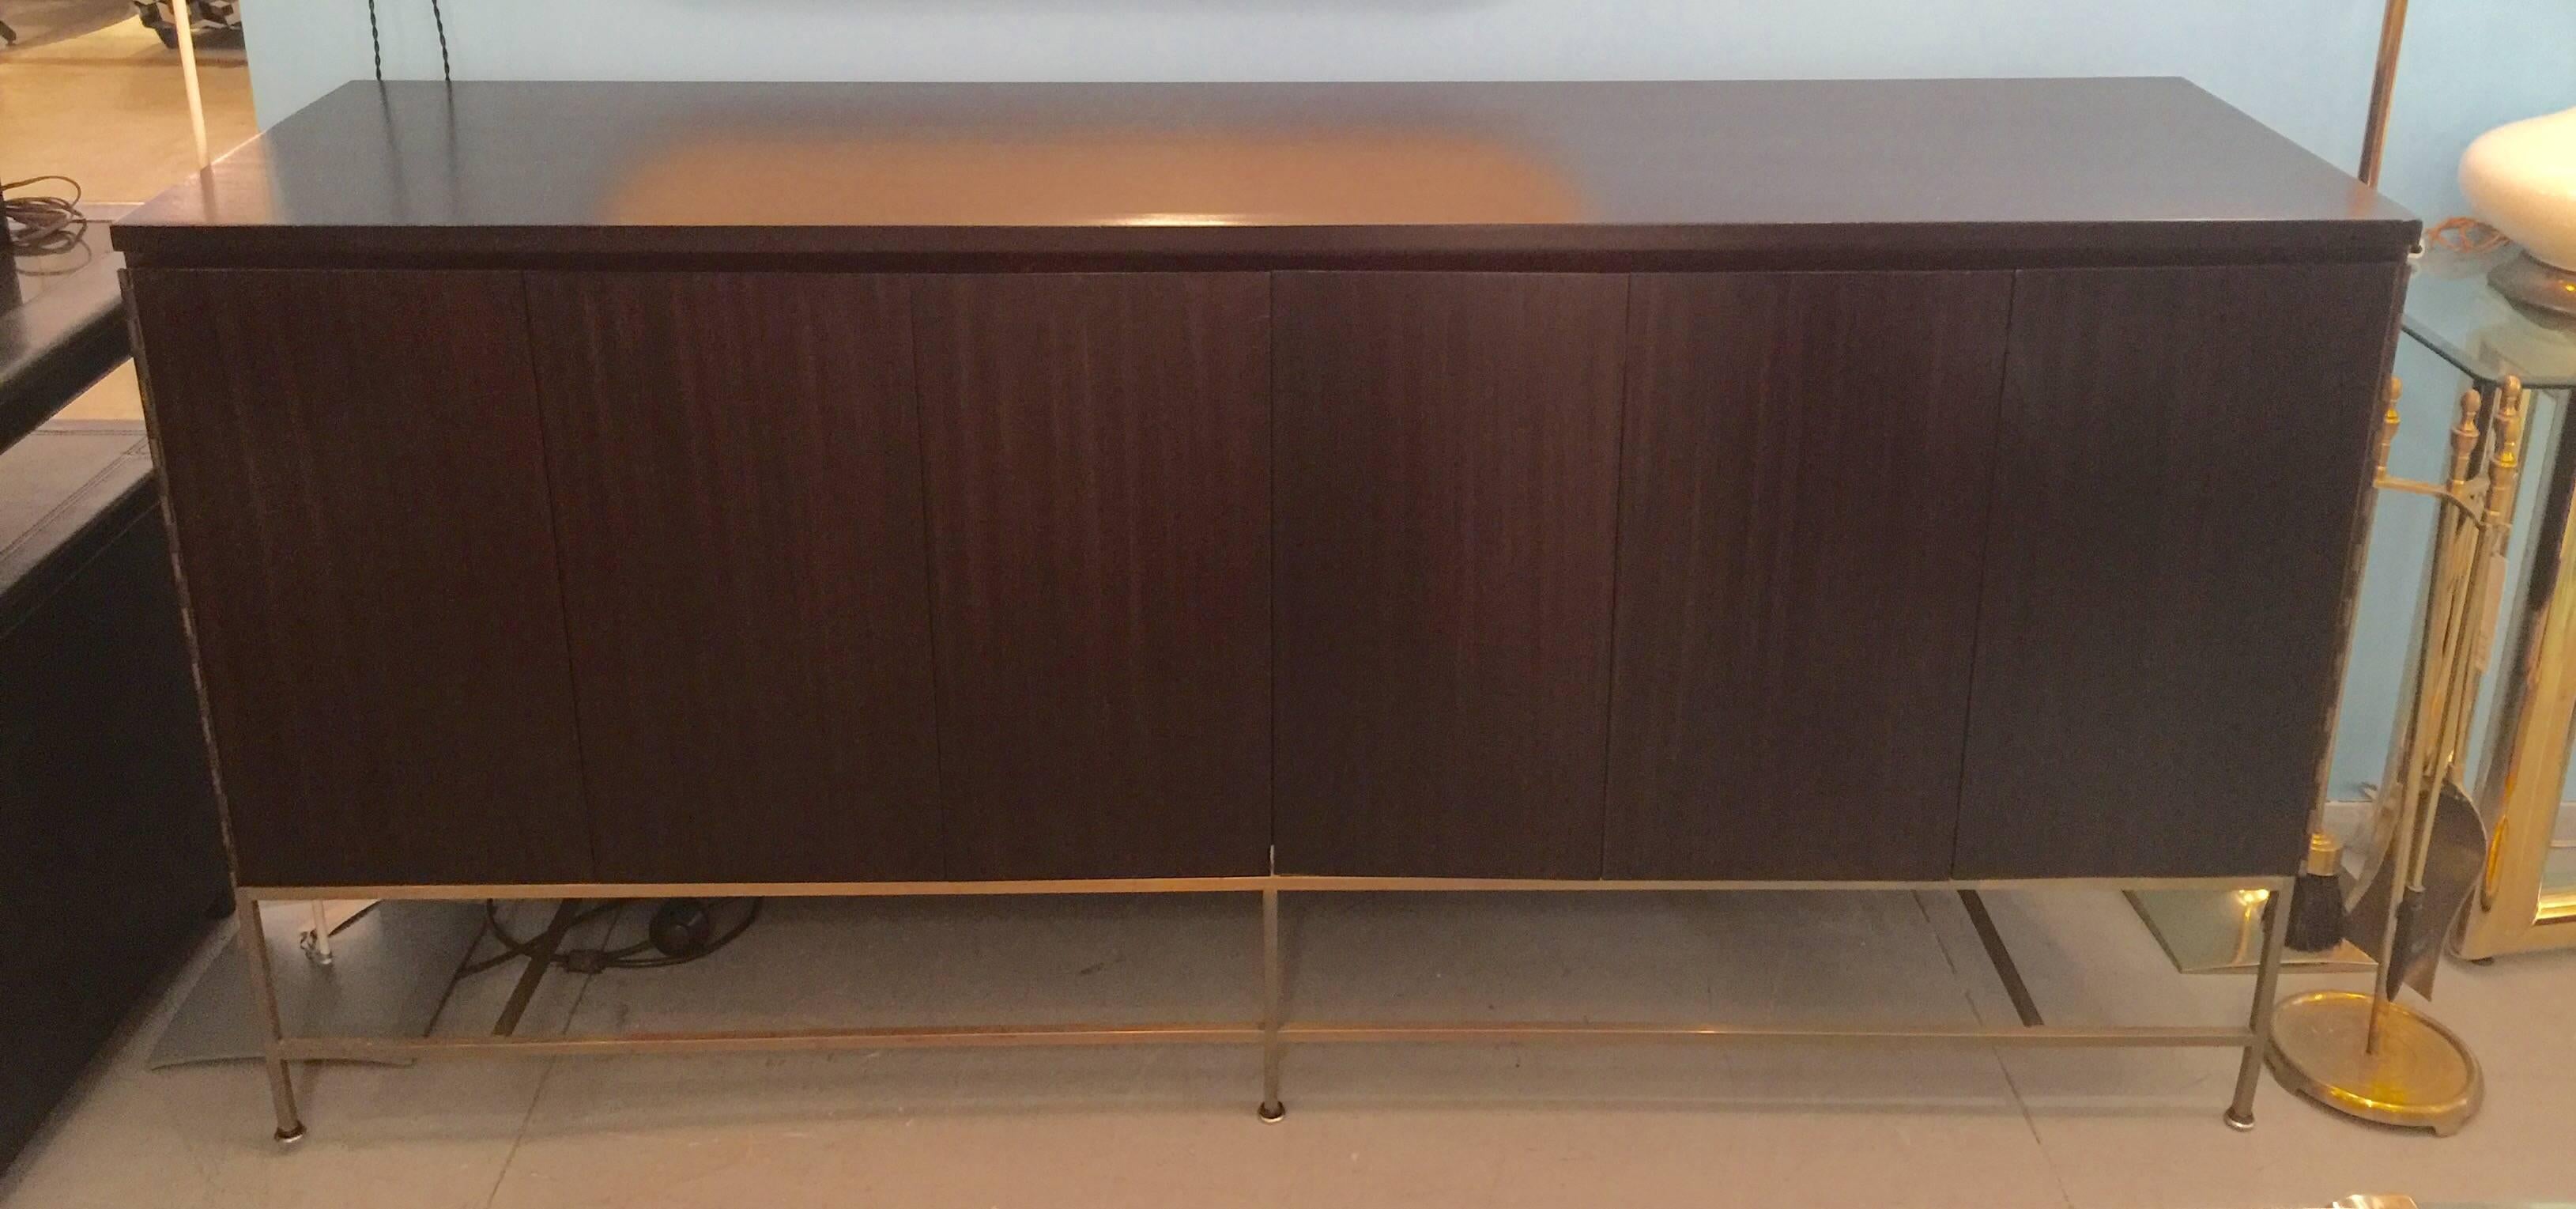 A folding-drawer mahogany credenza with brass base by Paul McCobb for Calvin Group. USA, circa 1950. Features interior shelves and drawers. Finish is espresso / dark brown stain.